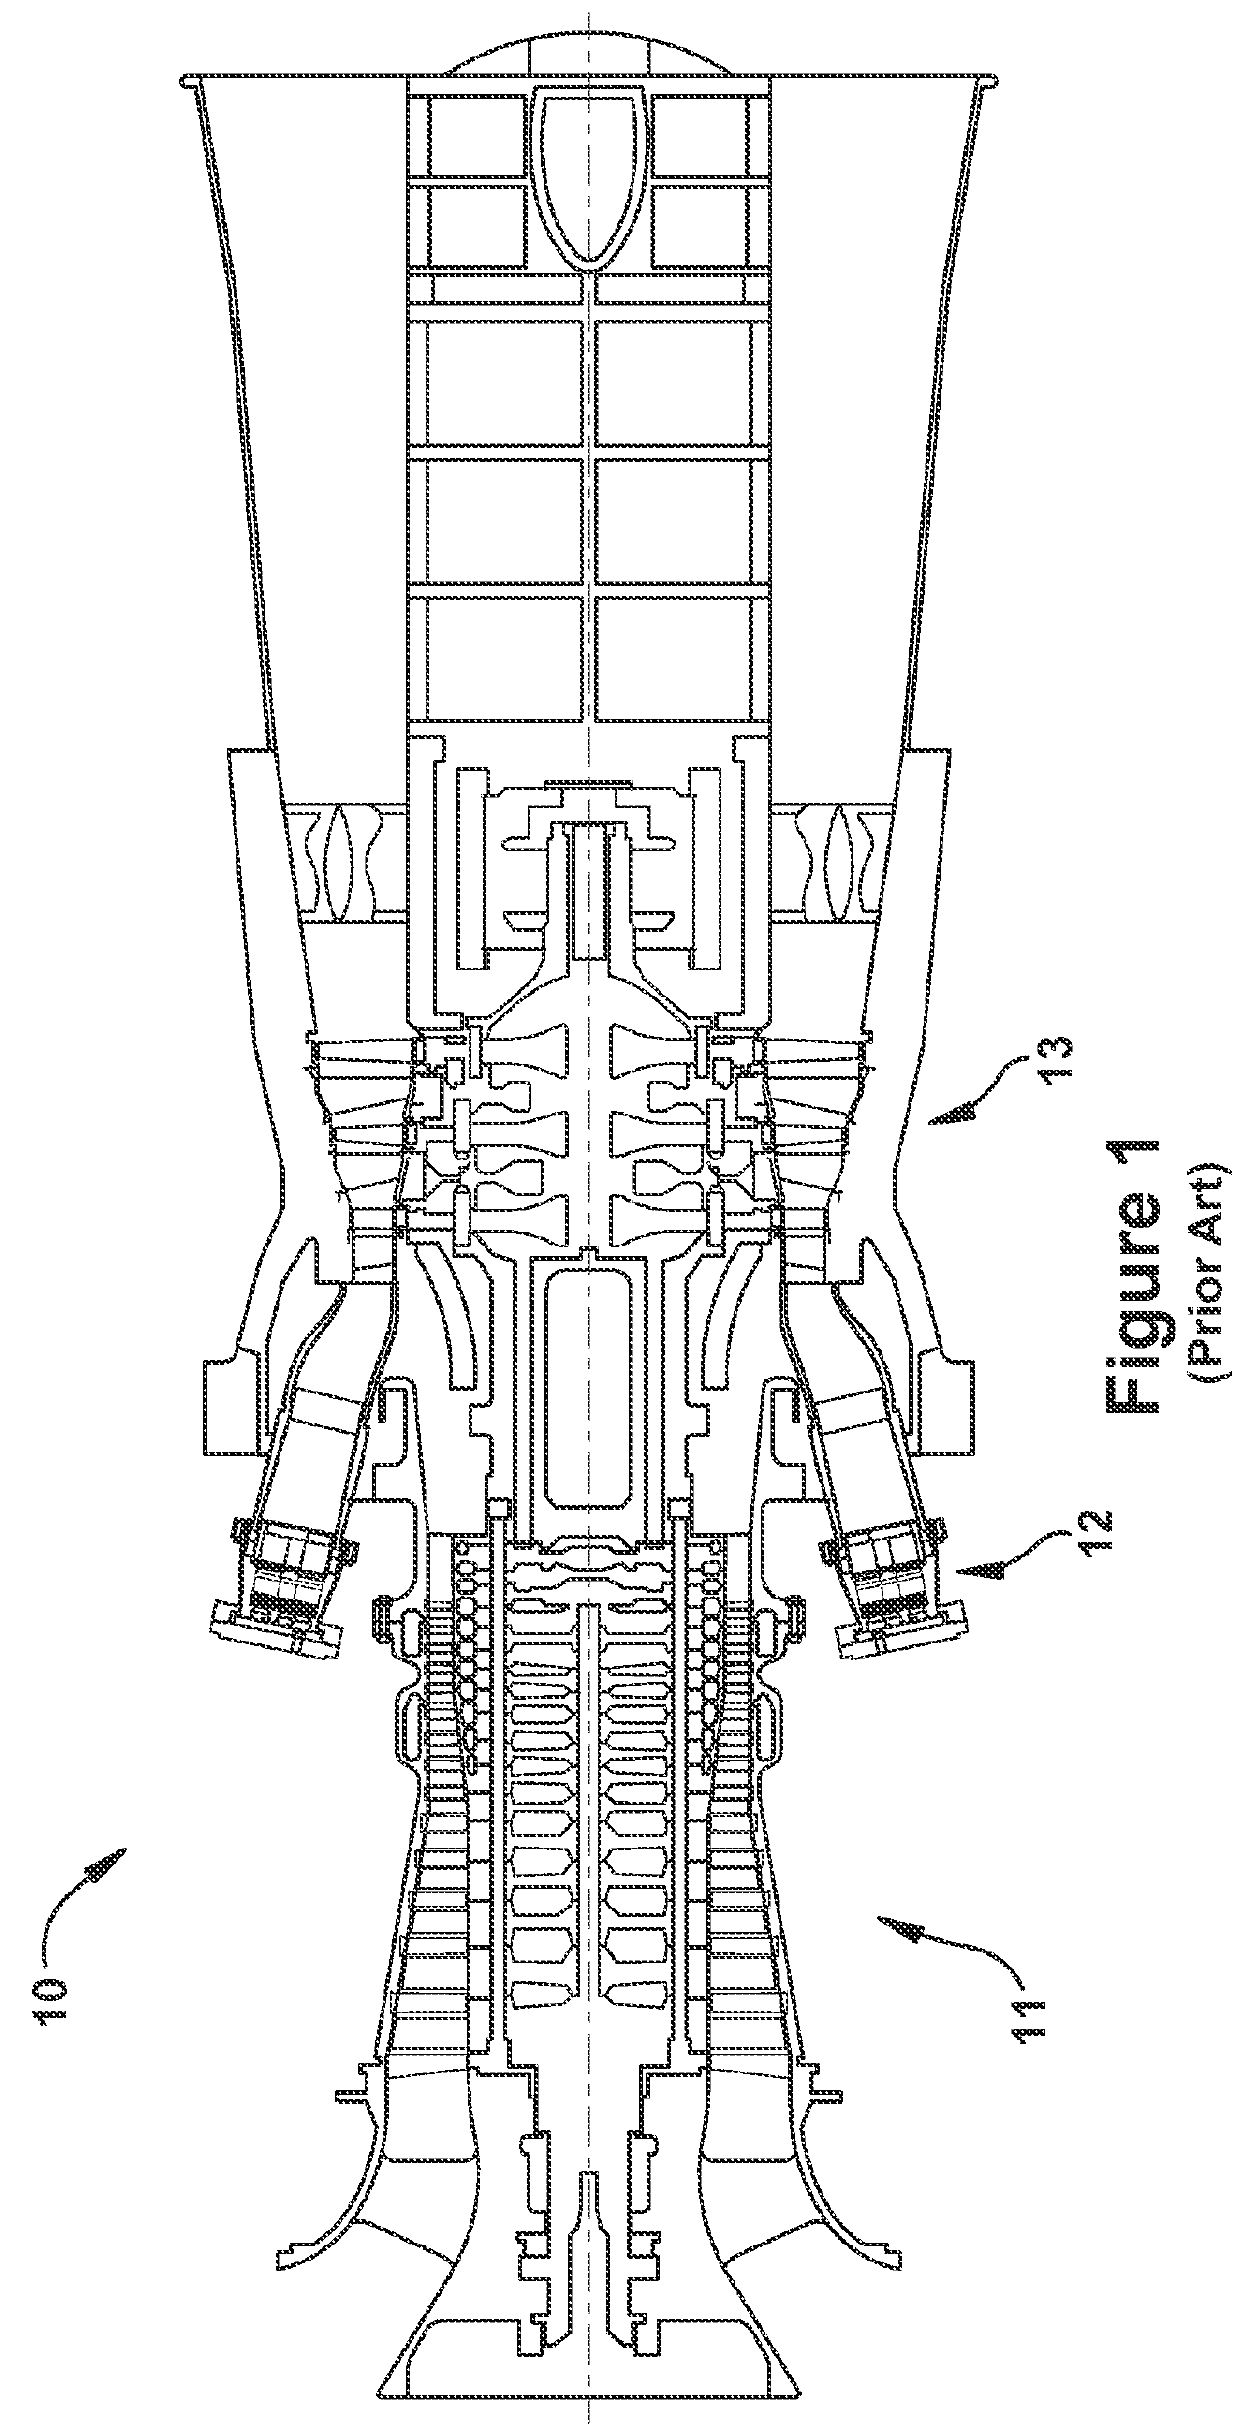 Combustor nozzles in gas turbine engines